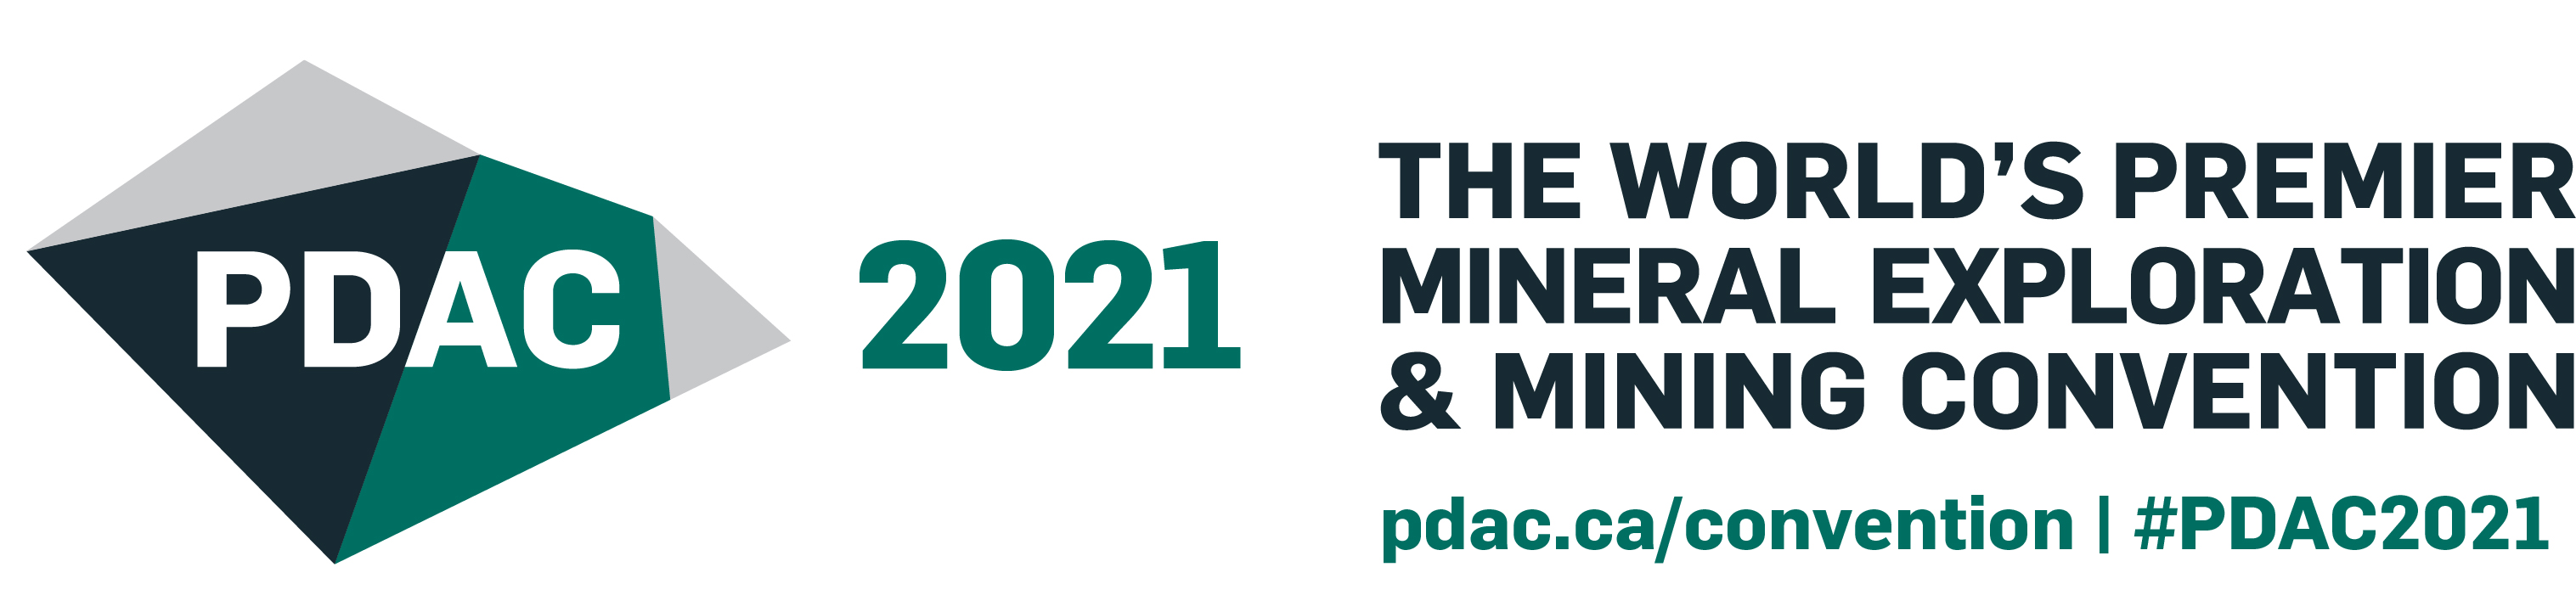 PDAC 2021 organized by Prospectors & Developers Association of Canada (PDAC)